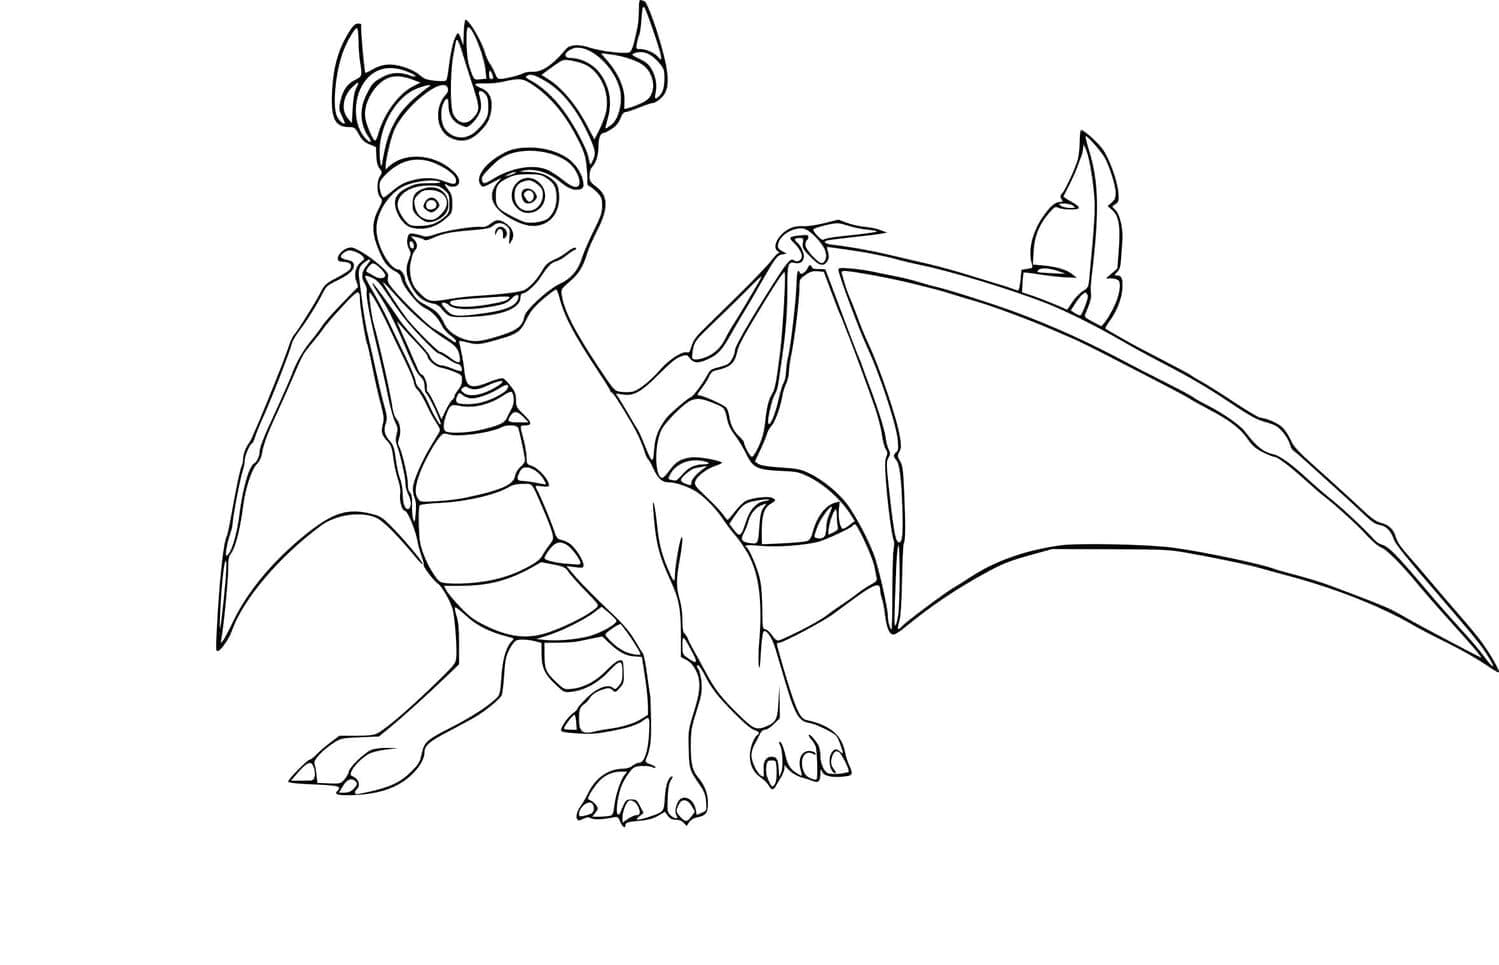 Spyro Imprimable coloring page